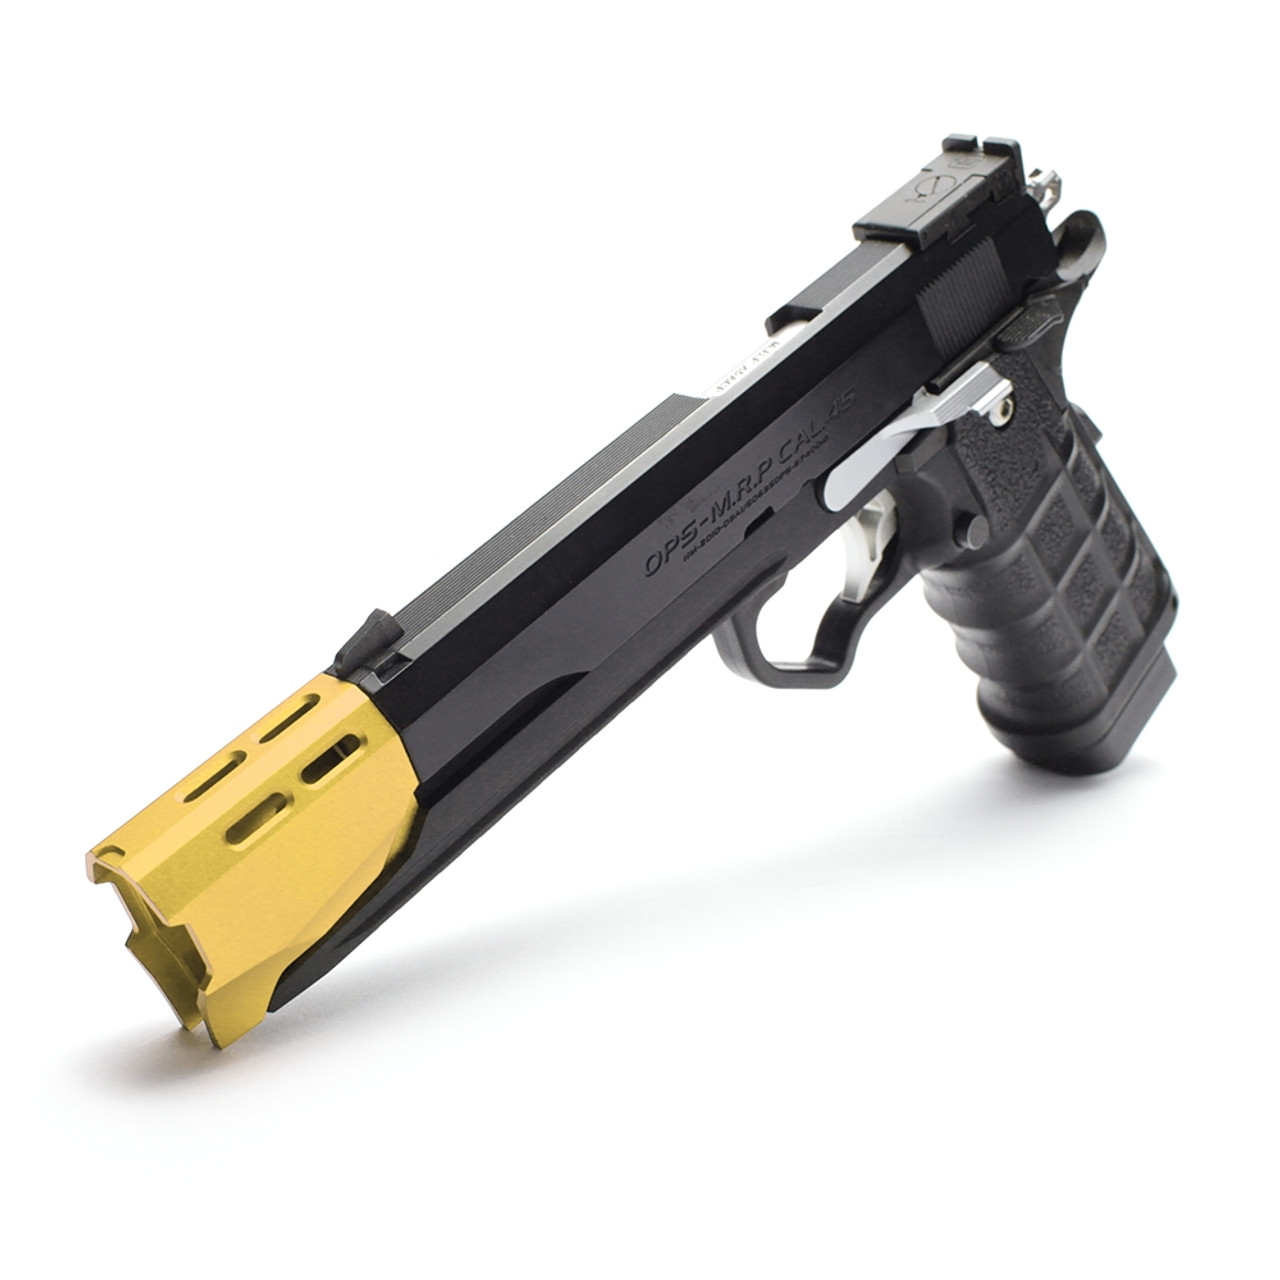 Nine Ball Aluminum Alloy Lower Frame with Compensator for Tokyo Marui Hi-Capa Airsoft Pistols | Gold